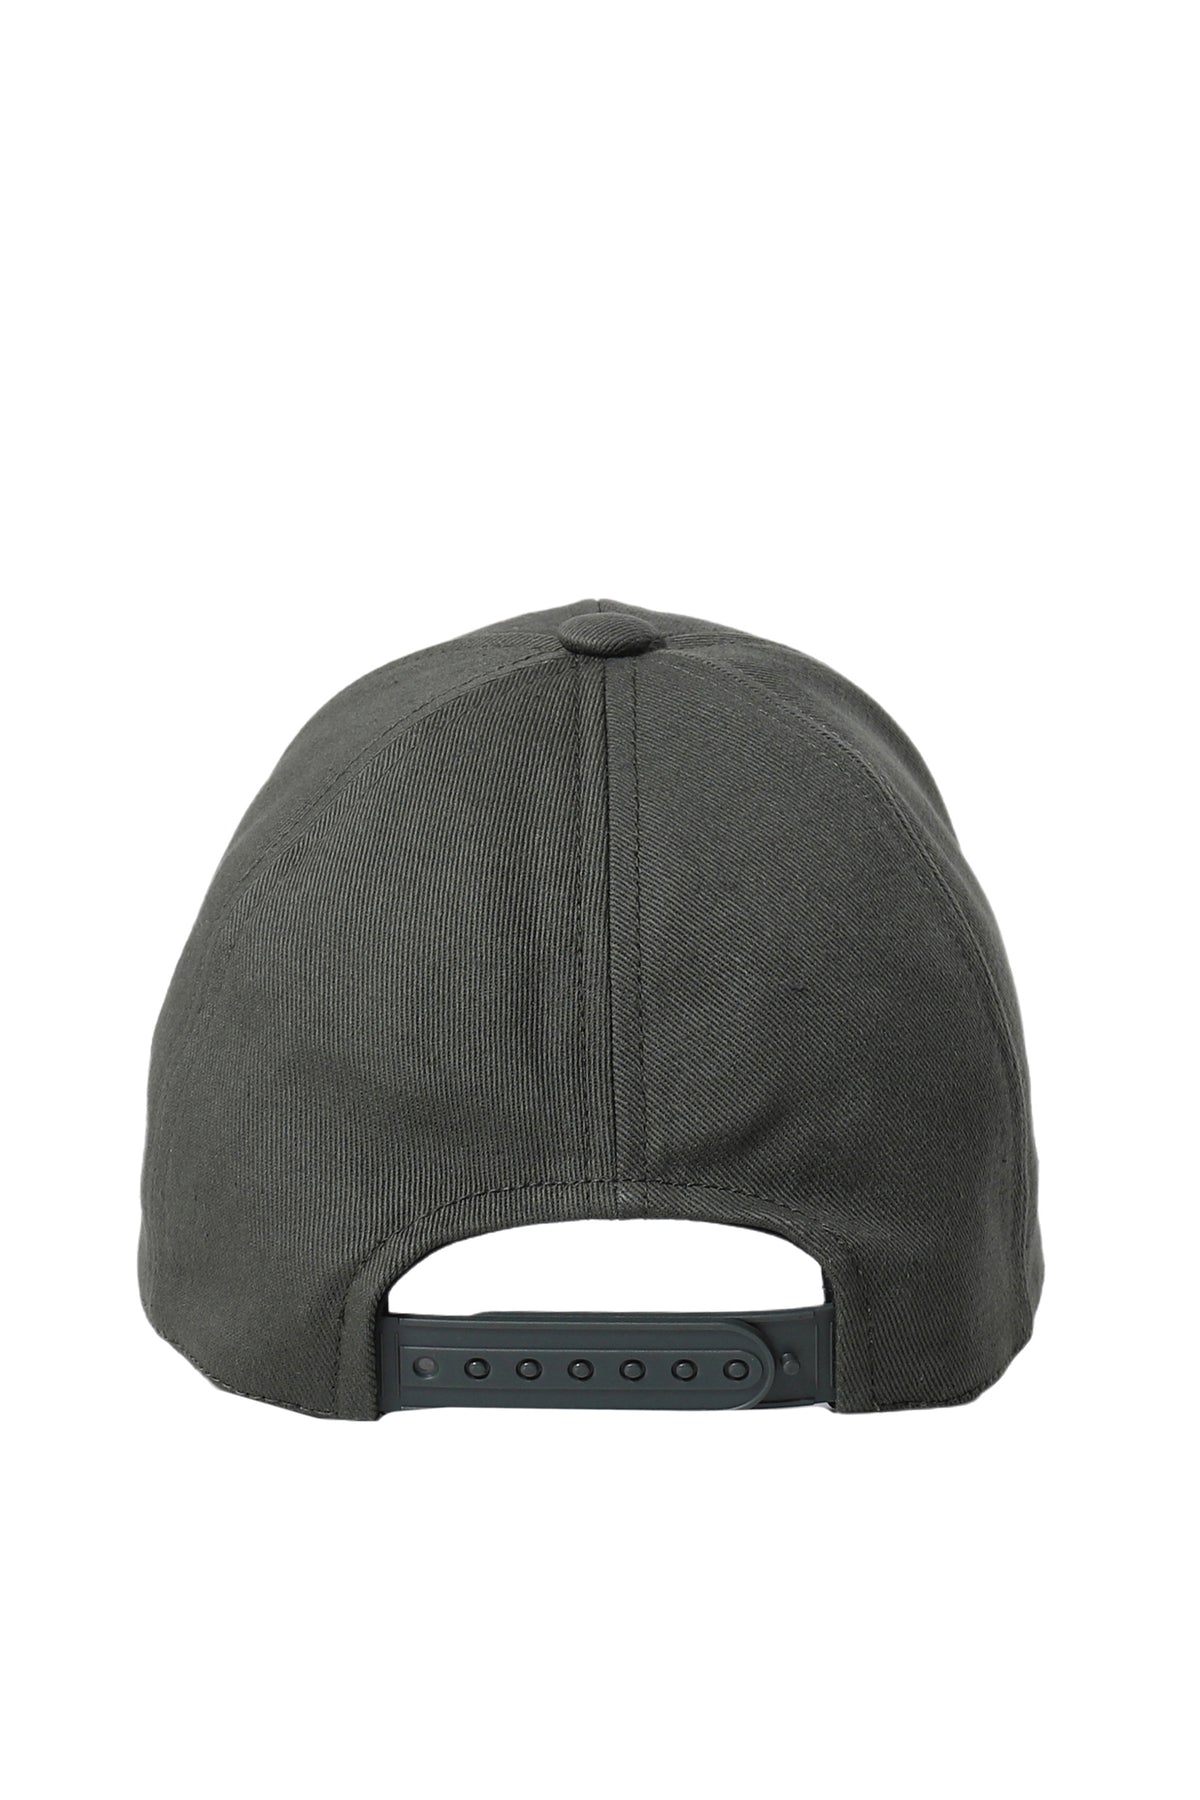 EMBROIDERED COTTON CAP / GRN